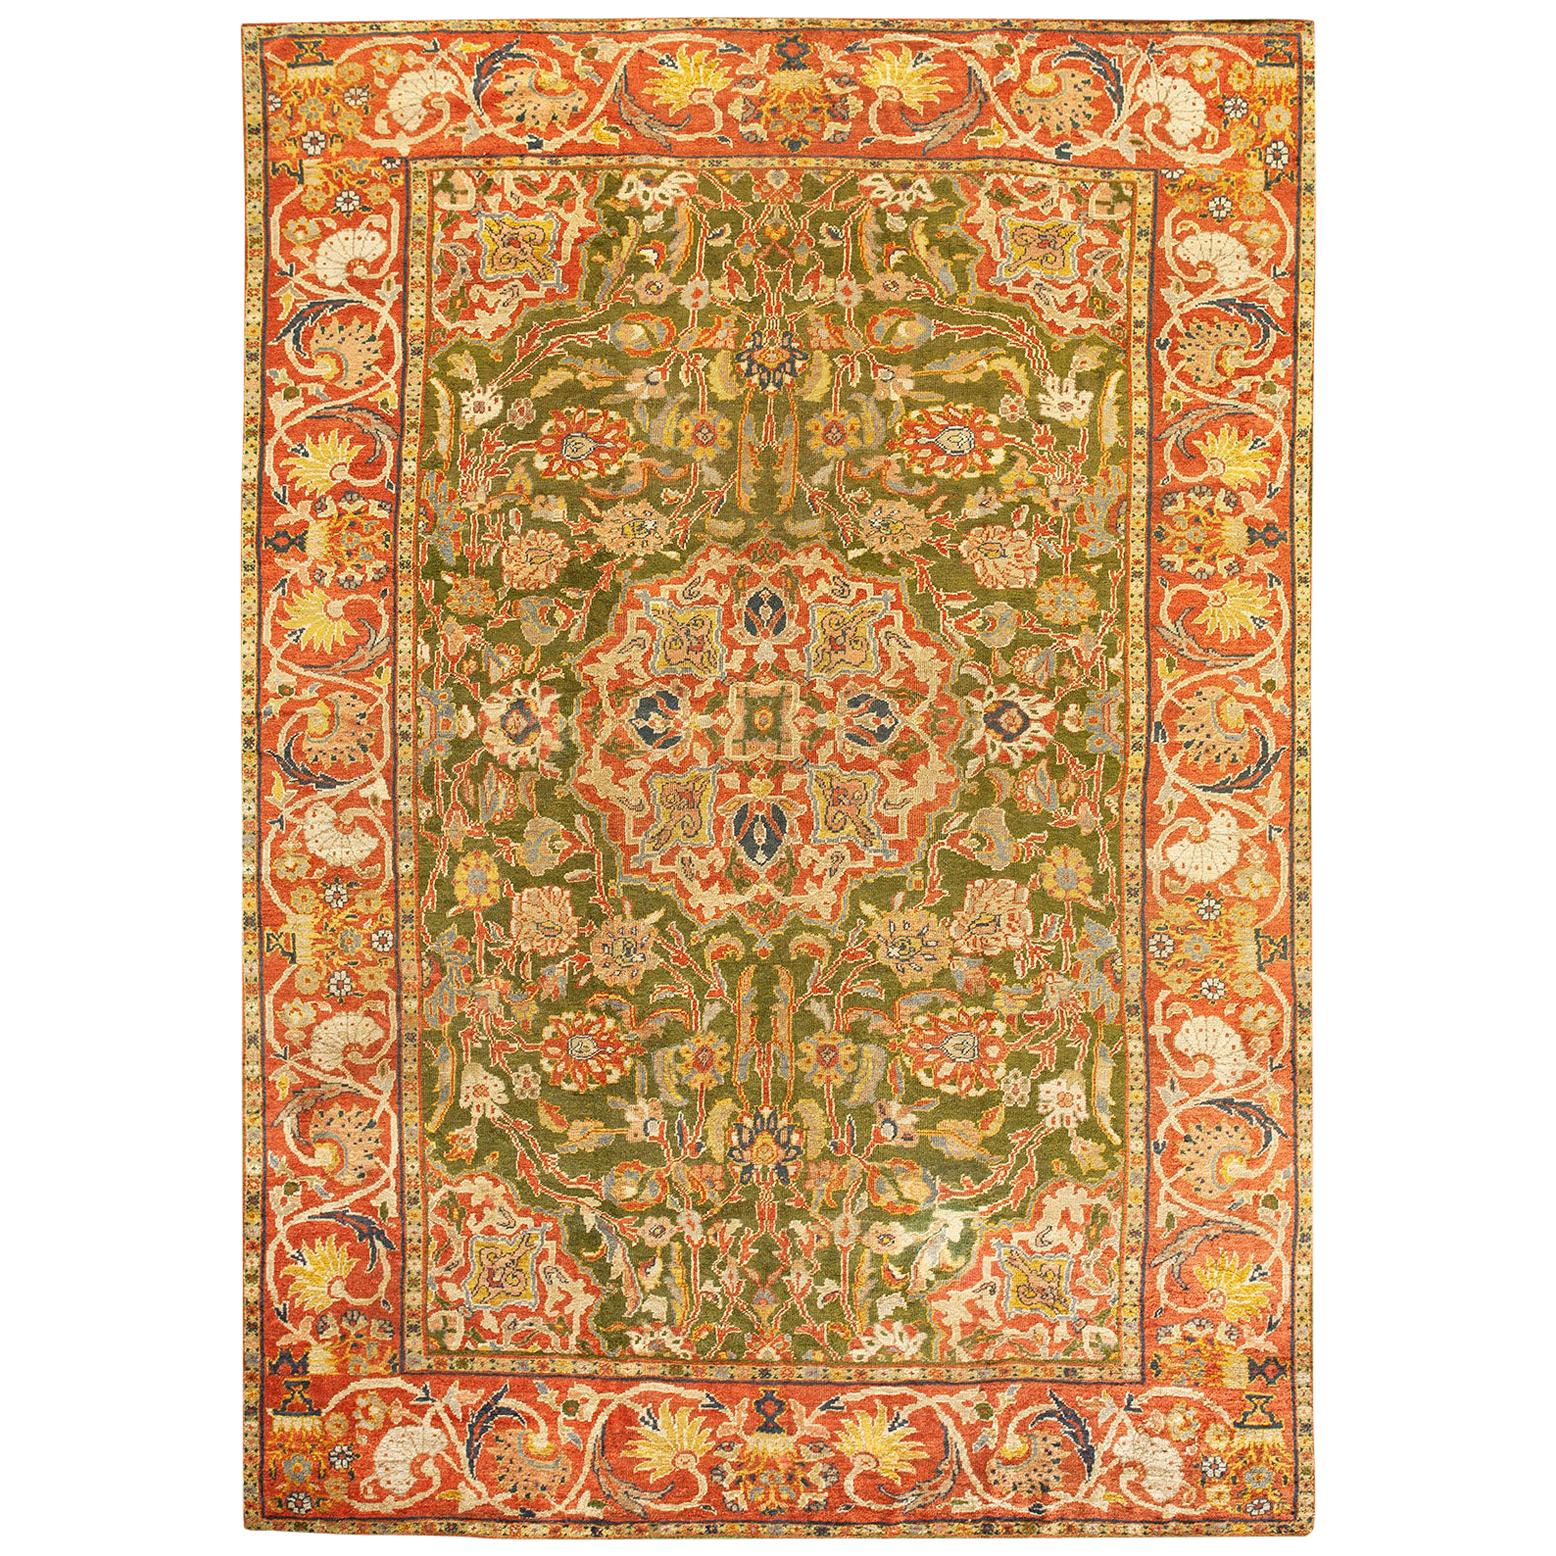 Late 19th Century Persian Sultanabad Carpet  ( 9'4" x 12'4" - 285 x 375 )